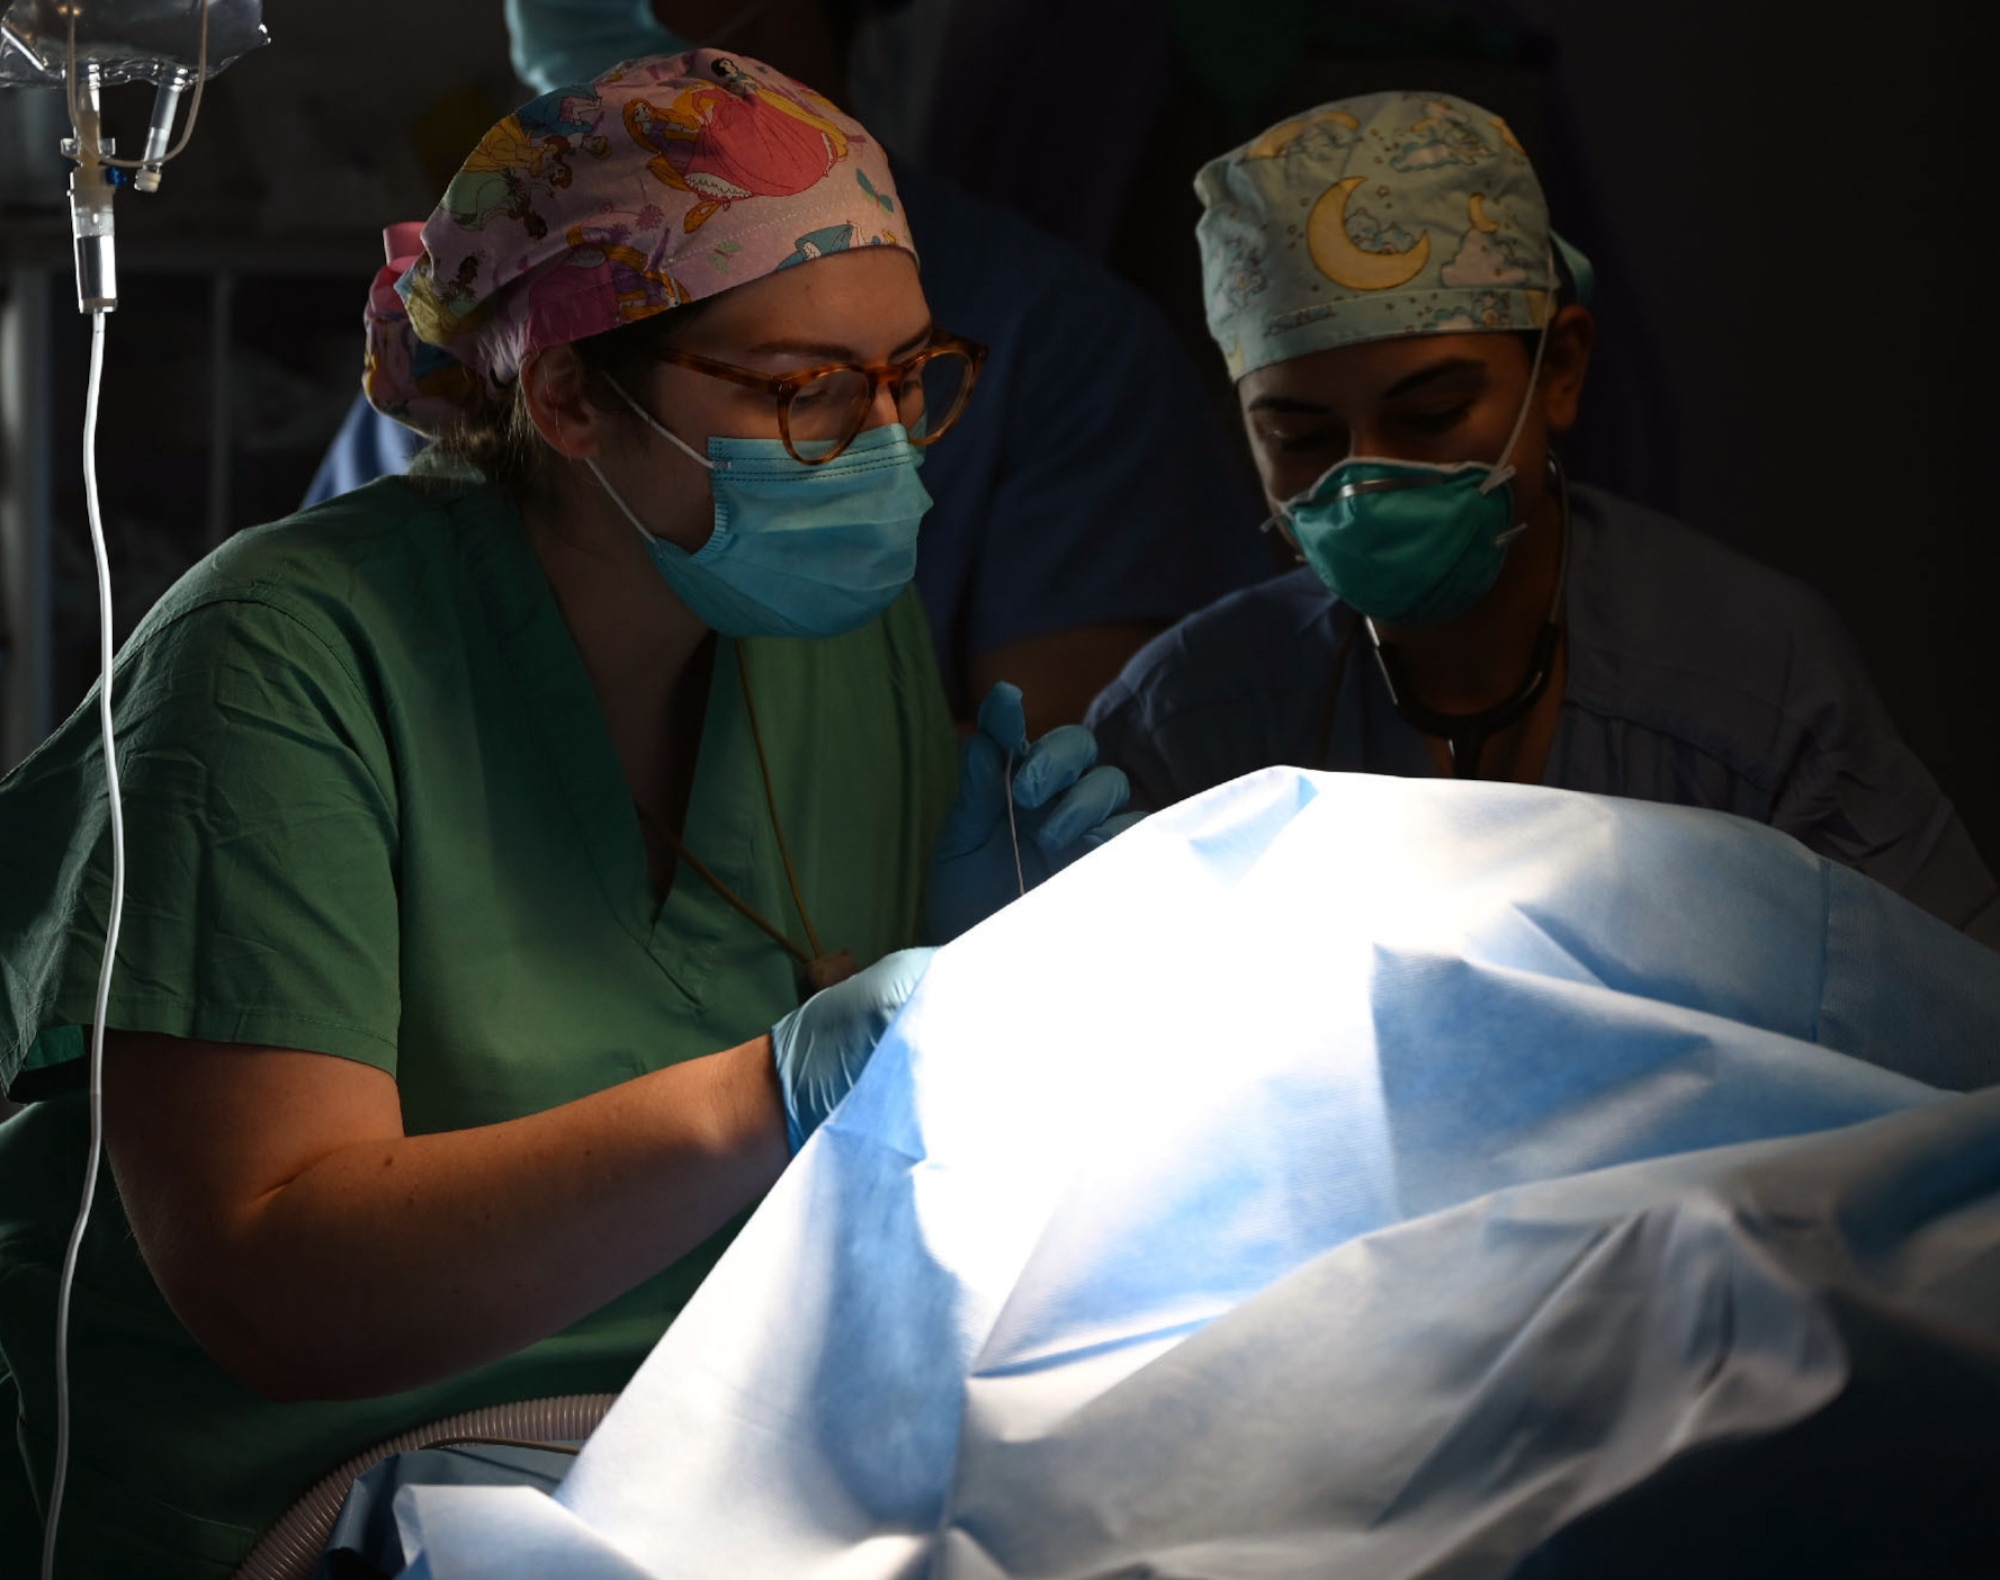 Air Force Capts. Courtney Hood and Kimpreet Kaur, anesthesia residents with the 59th Medical Wing, Joint Base San Antonio-Lackland, evaluate a patient at Hospital del Sur in Choluteca